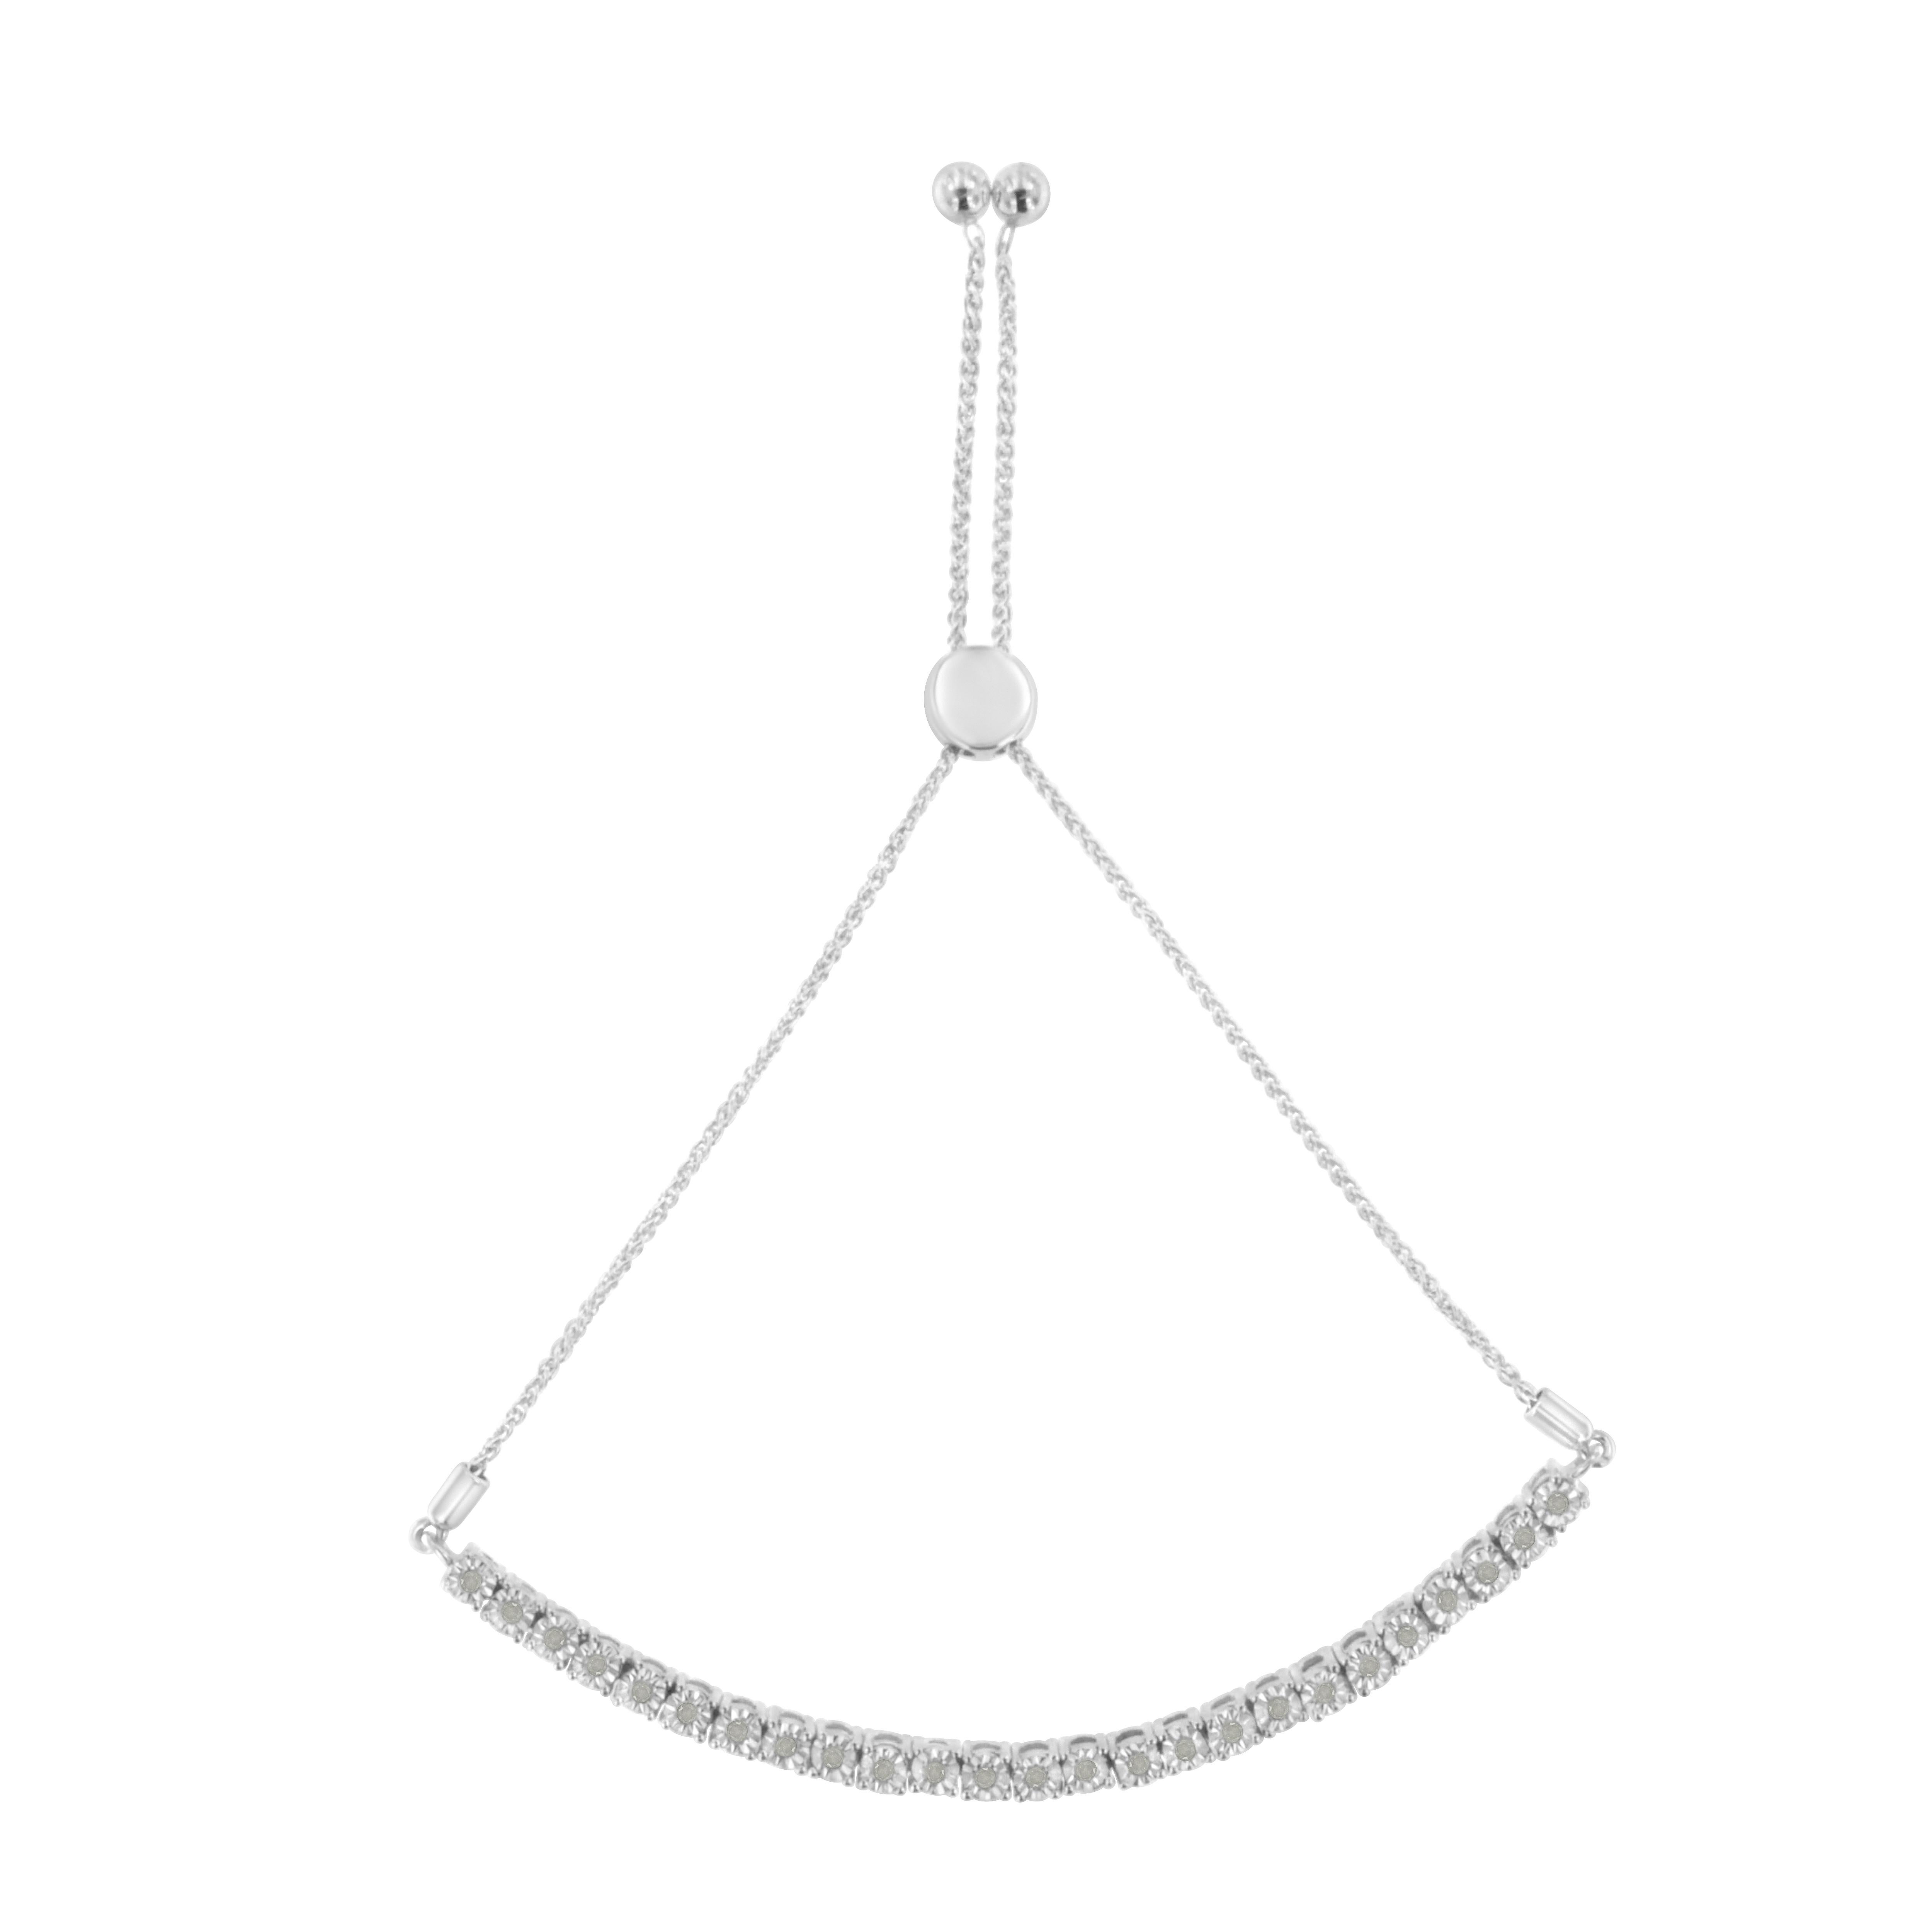 Elegant and timeless, this gorgeous .925 sterling silver bracelet features dainty miracle set rose-cut, promo quality diamonds, which are milky and cloudy in nature. The unique miracle-plate setting centers each genuine diamond in a mirror-finish,